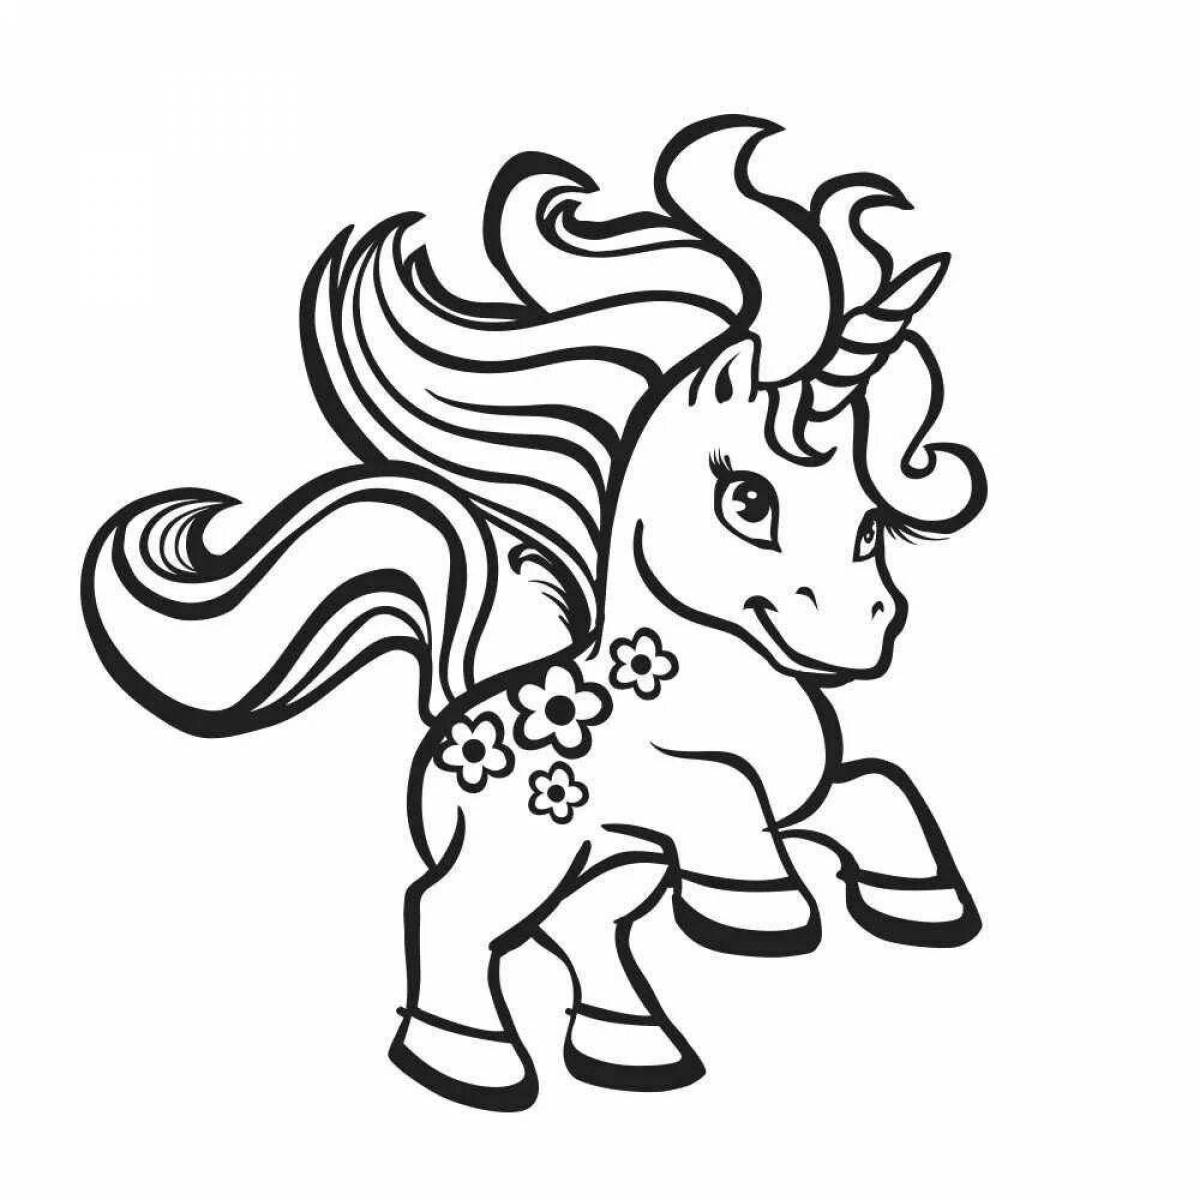 Splendorous coloring page unicorn picture for kids